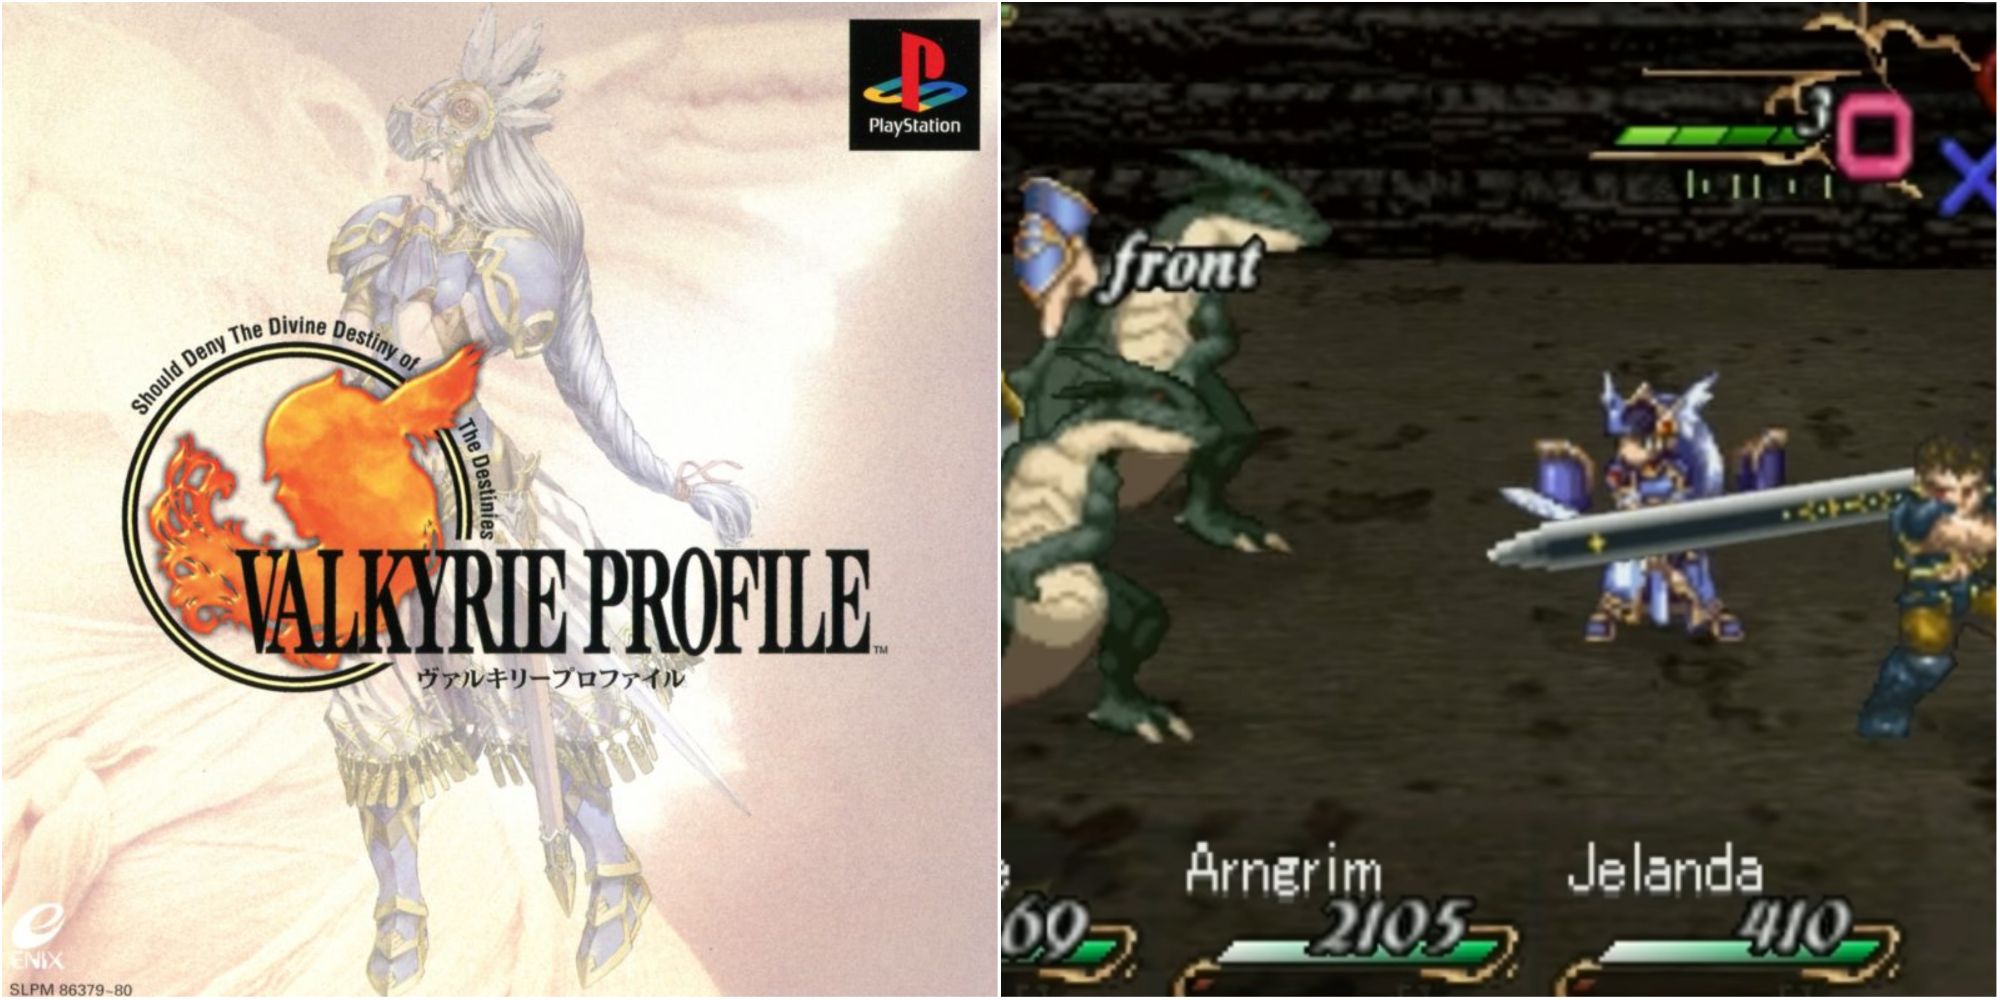 valkyrie profile cover art and gameplay